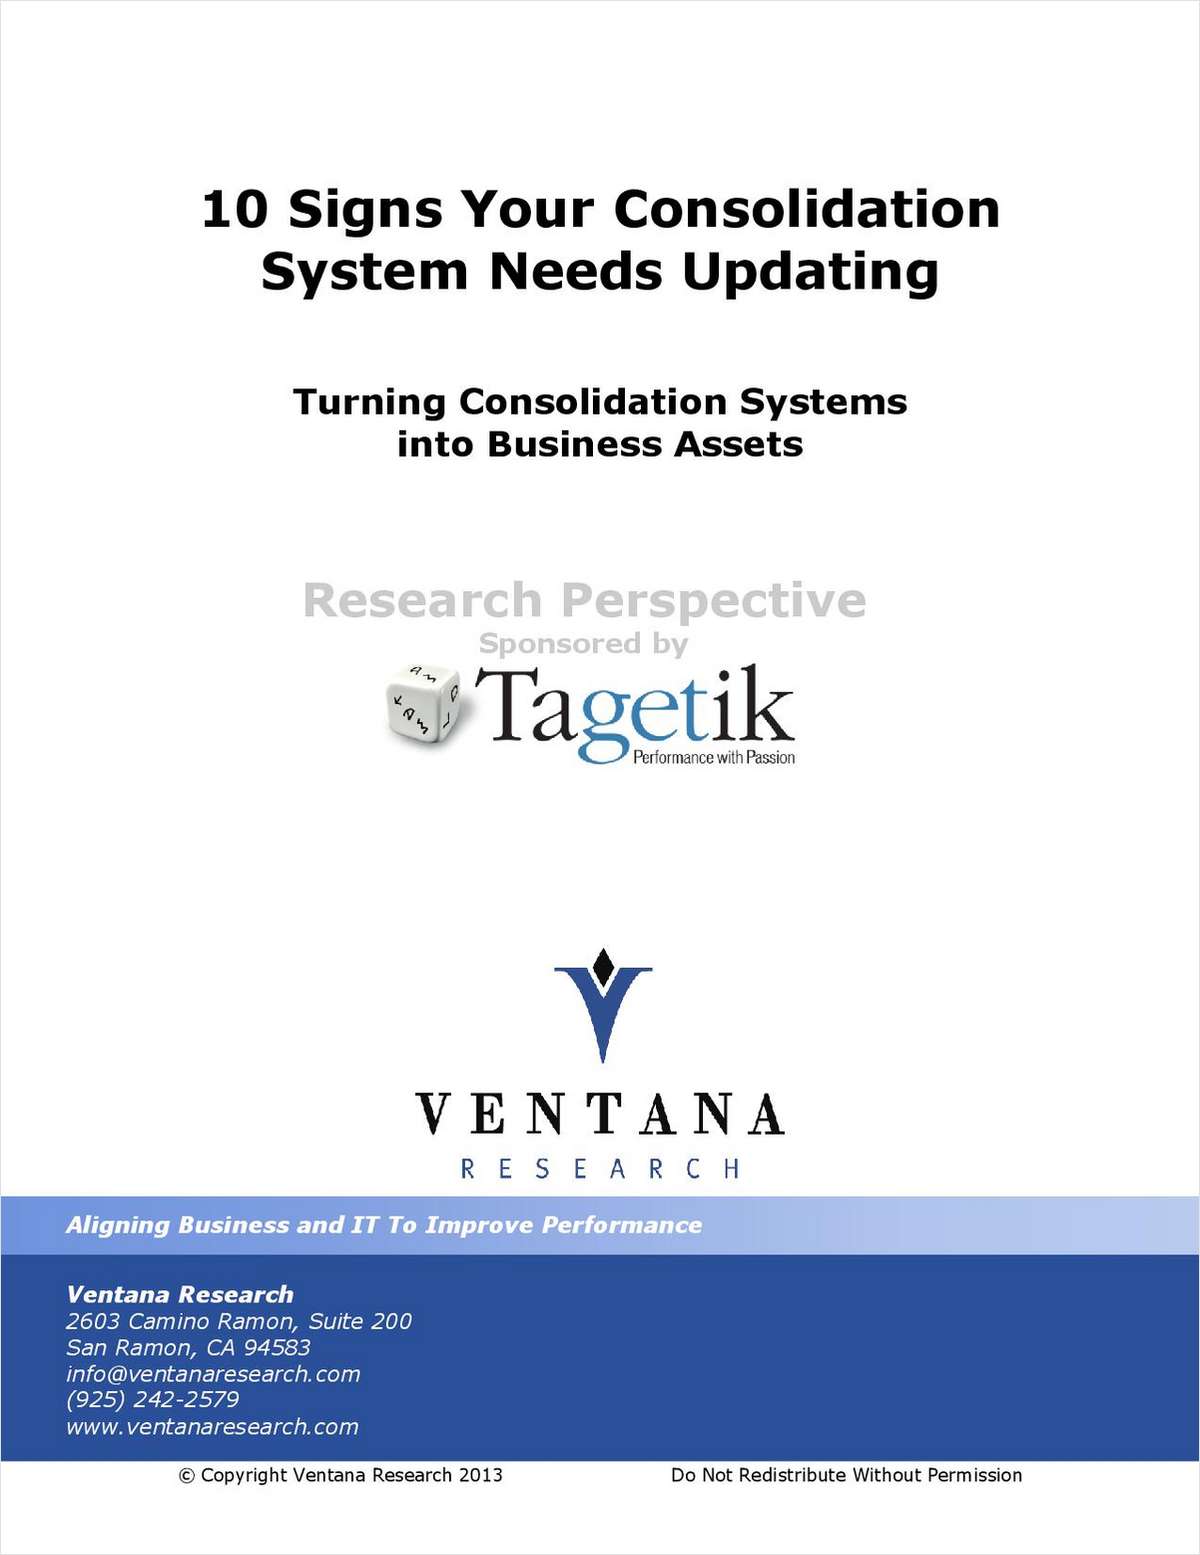 It's Time to Update Your Consolidation System: 10 Warning Signs